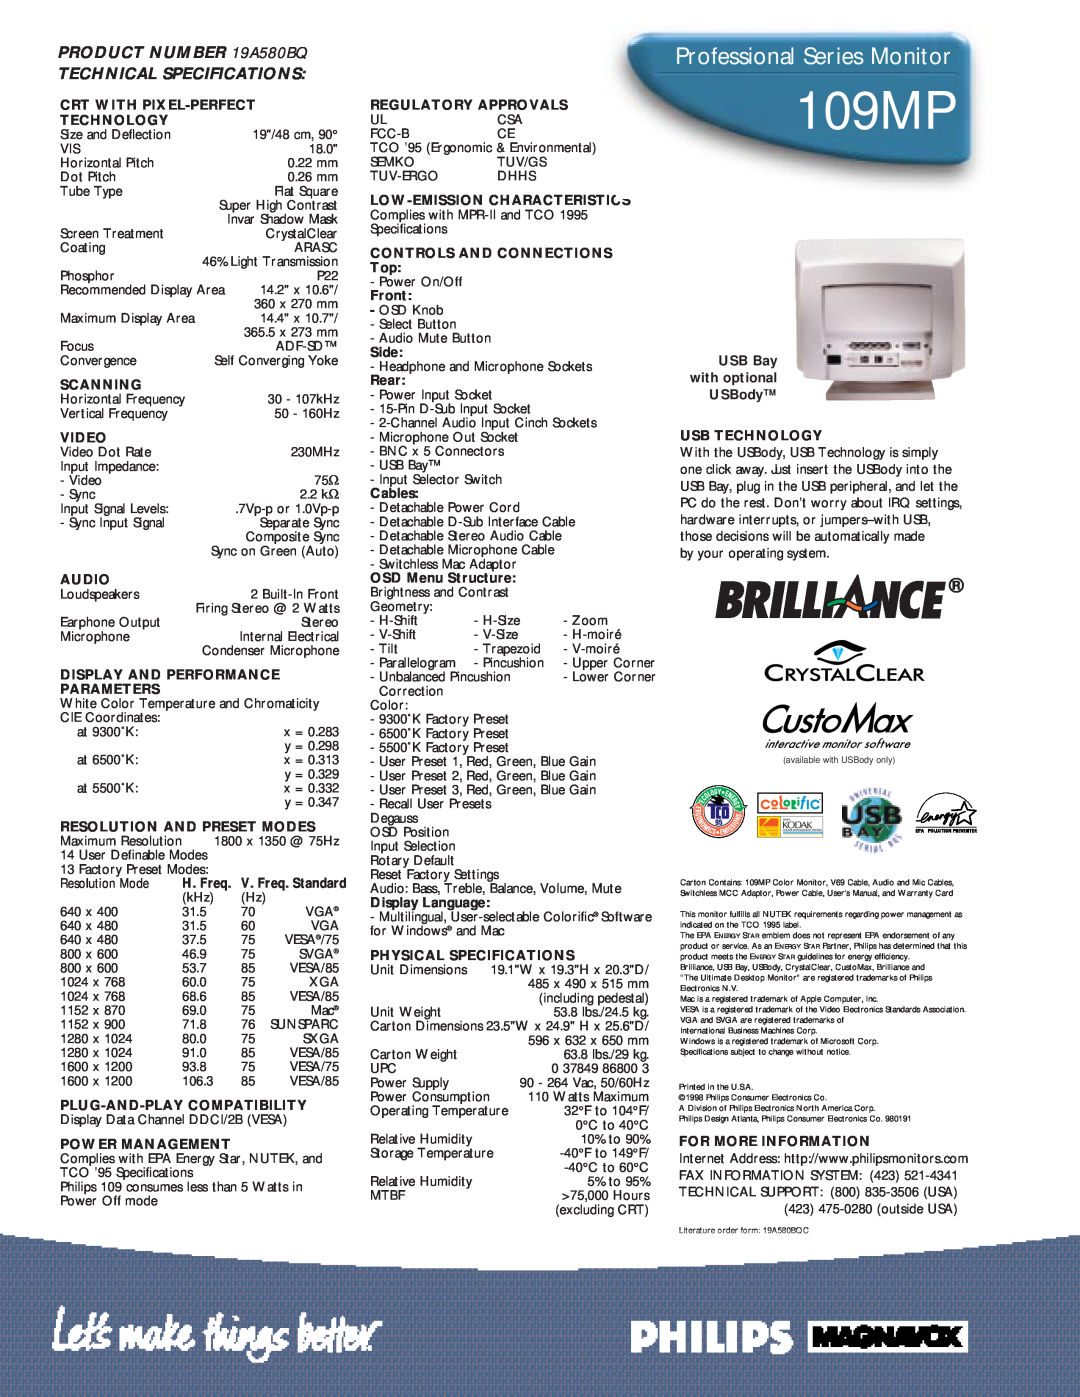 Philips 109MP manual Professional Series Monitor, PRODUCT NUMBER 19A580BQ TECHNICAL SPECIFICATIONS 